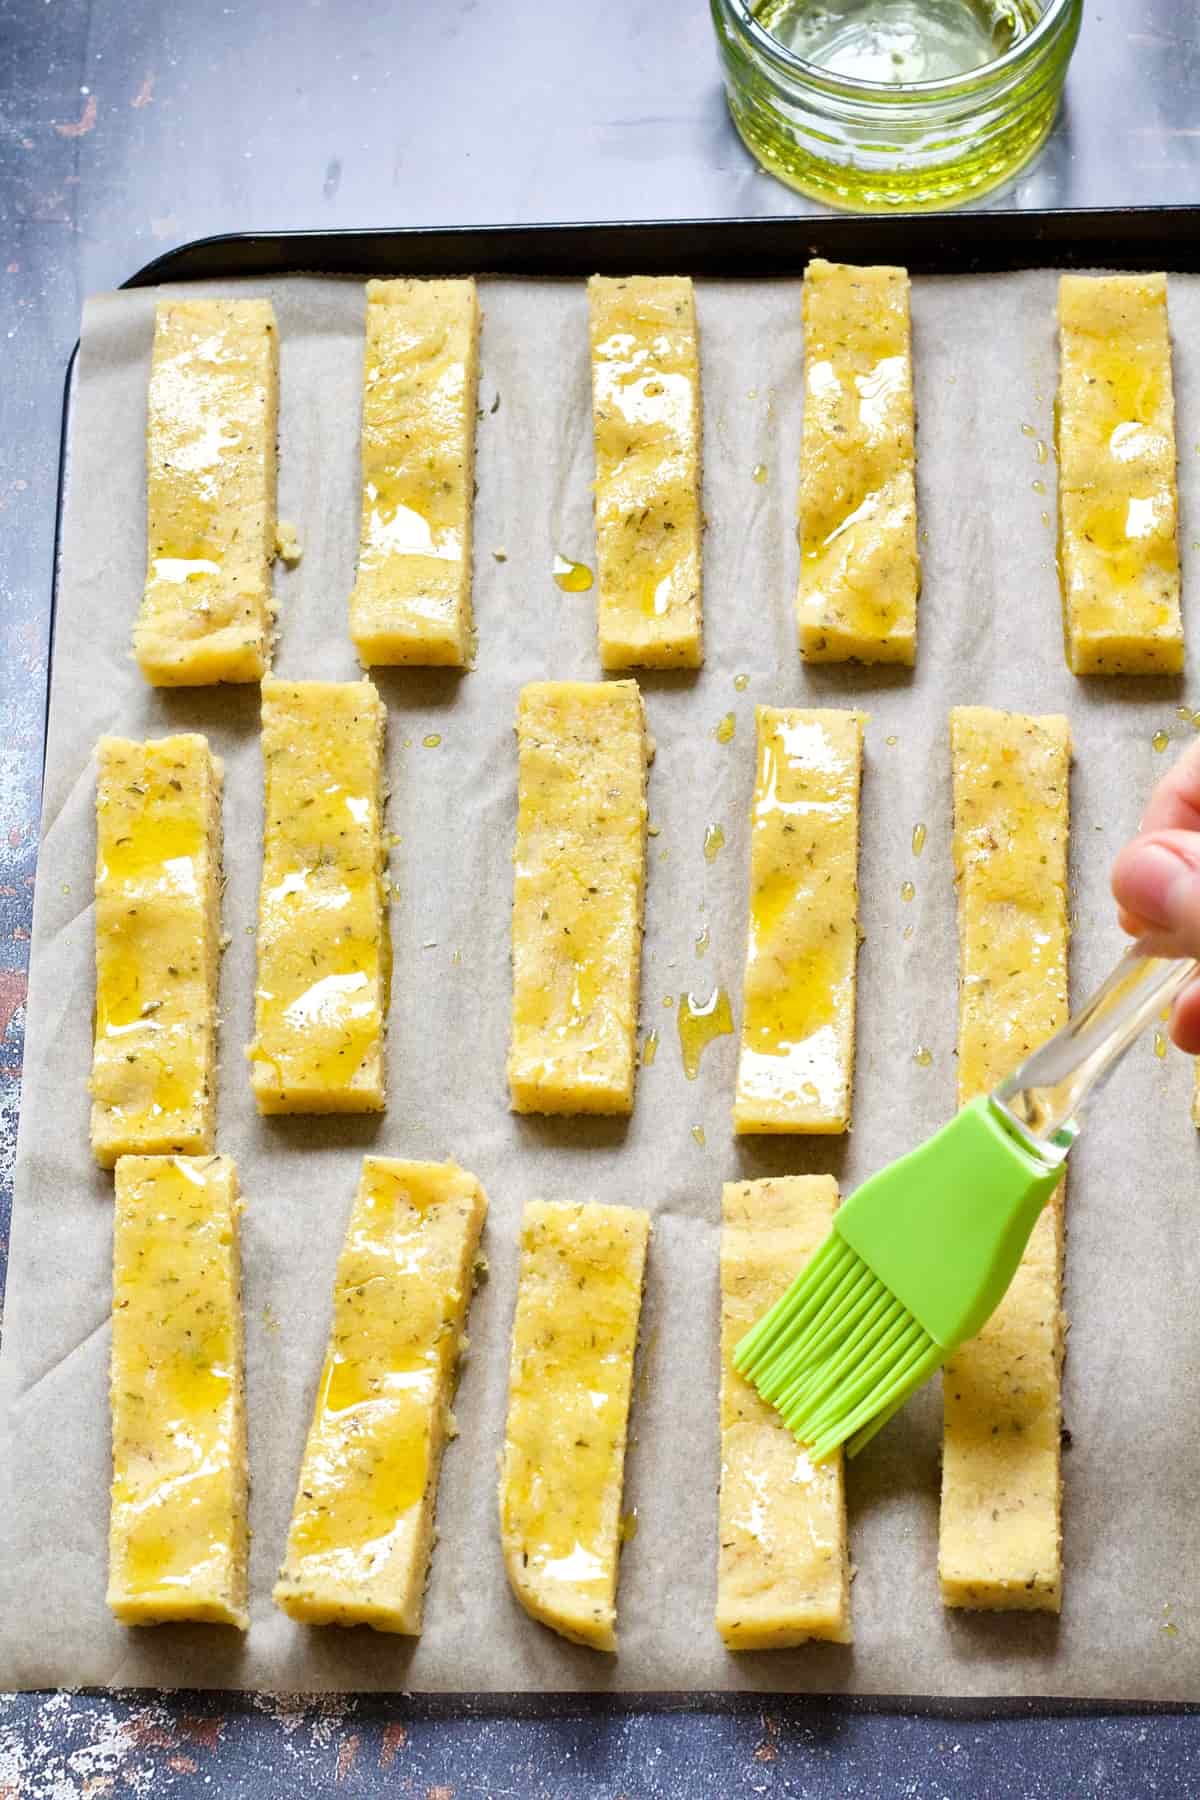 Polenta chips being brushed with oil before baking.